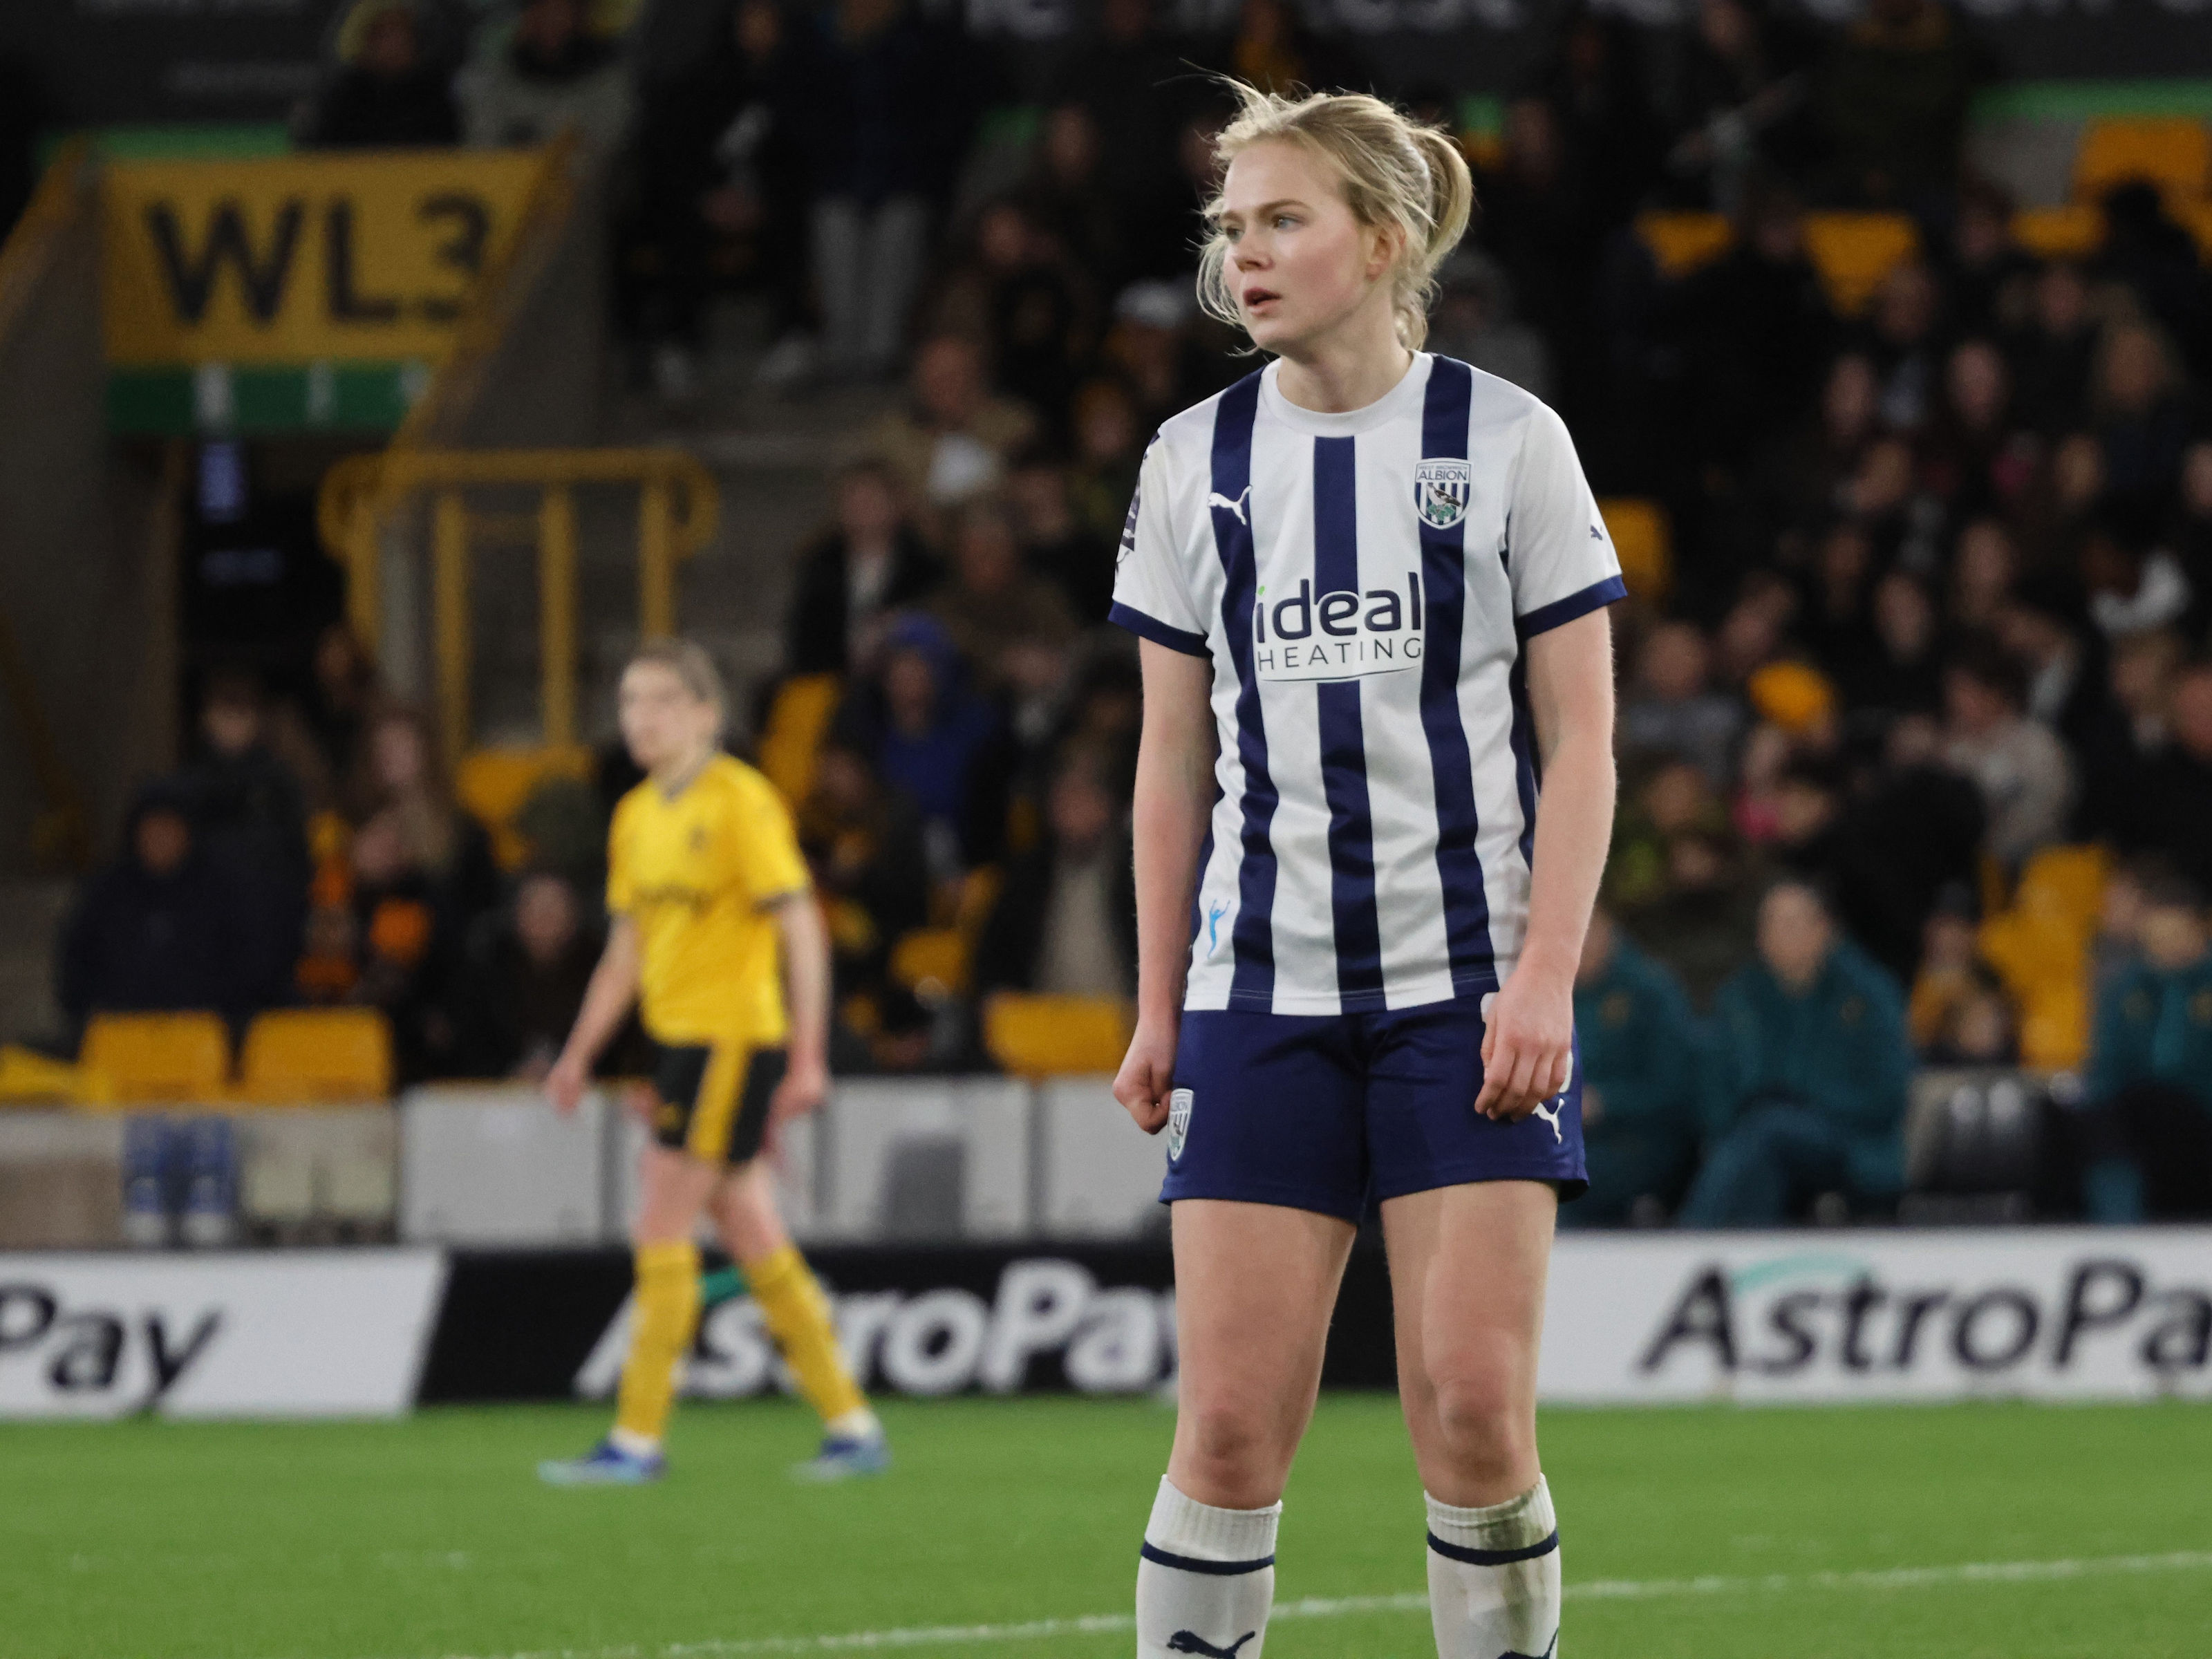 An image of Phoebe Warner stood in the middle of the pitch at Molineux